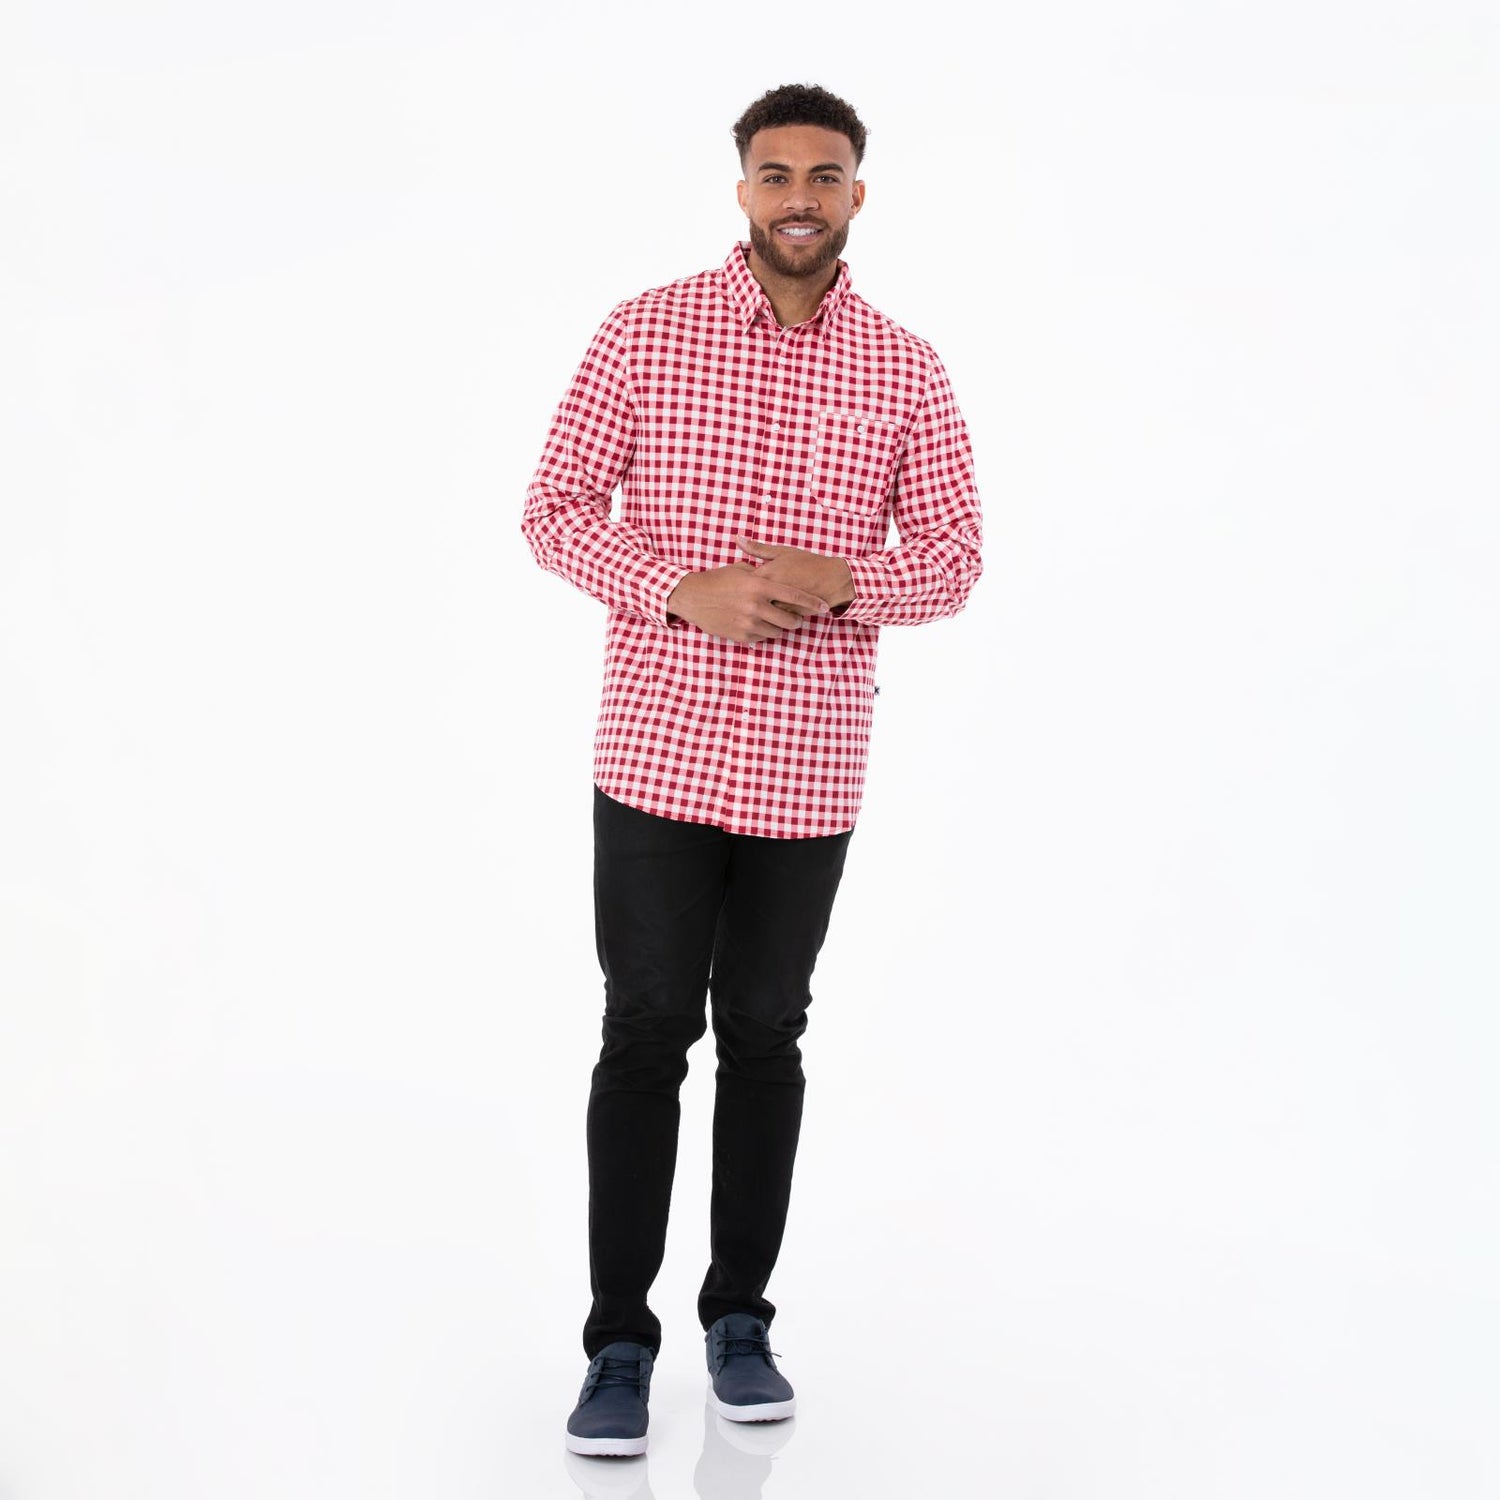 Men's Print Long Sleeve Woven Button-Down Shirt in Wild Strawberry Gingham